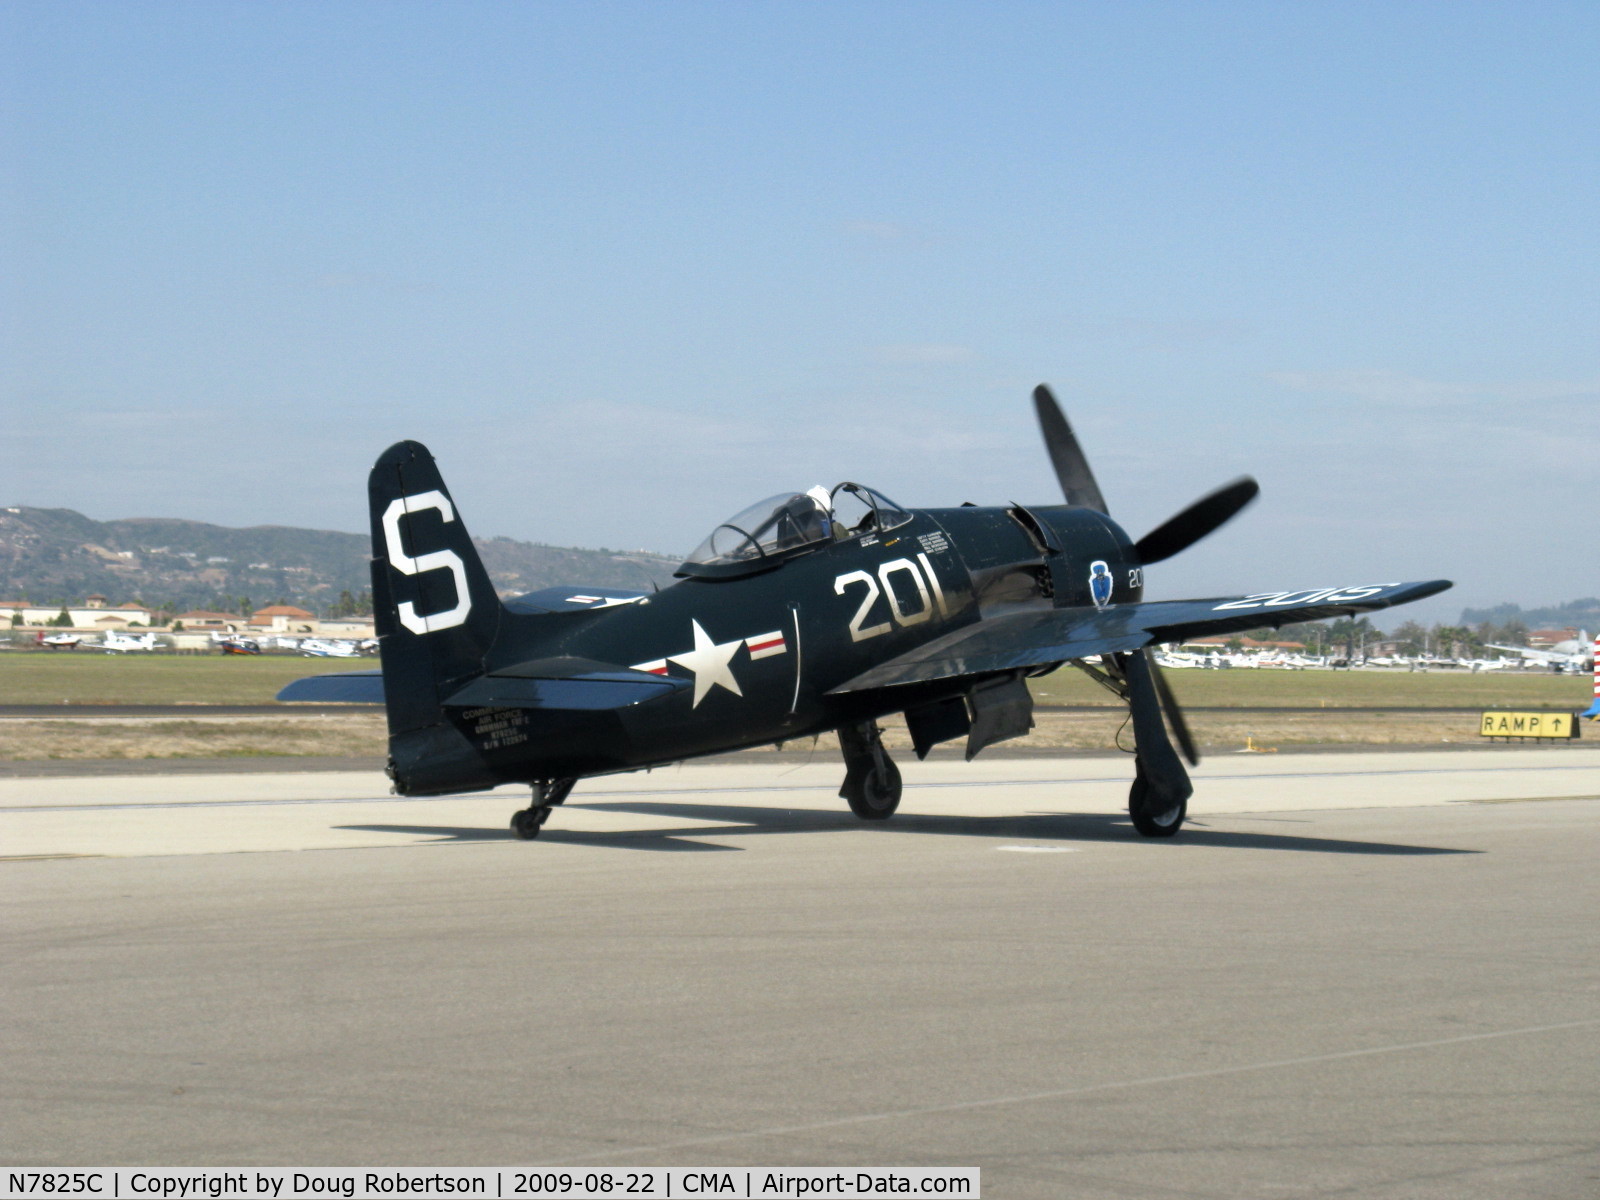 N7825C, 1948 Grumman F8F-2 (G58) Bearcat C/N D.1227, 1949 Grumman F8F-2 BEARCAT, P&W R-2800-34W Double Wasp 2,100 Hp, taxi